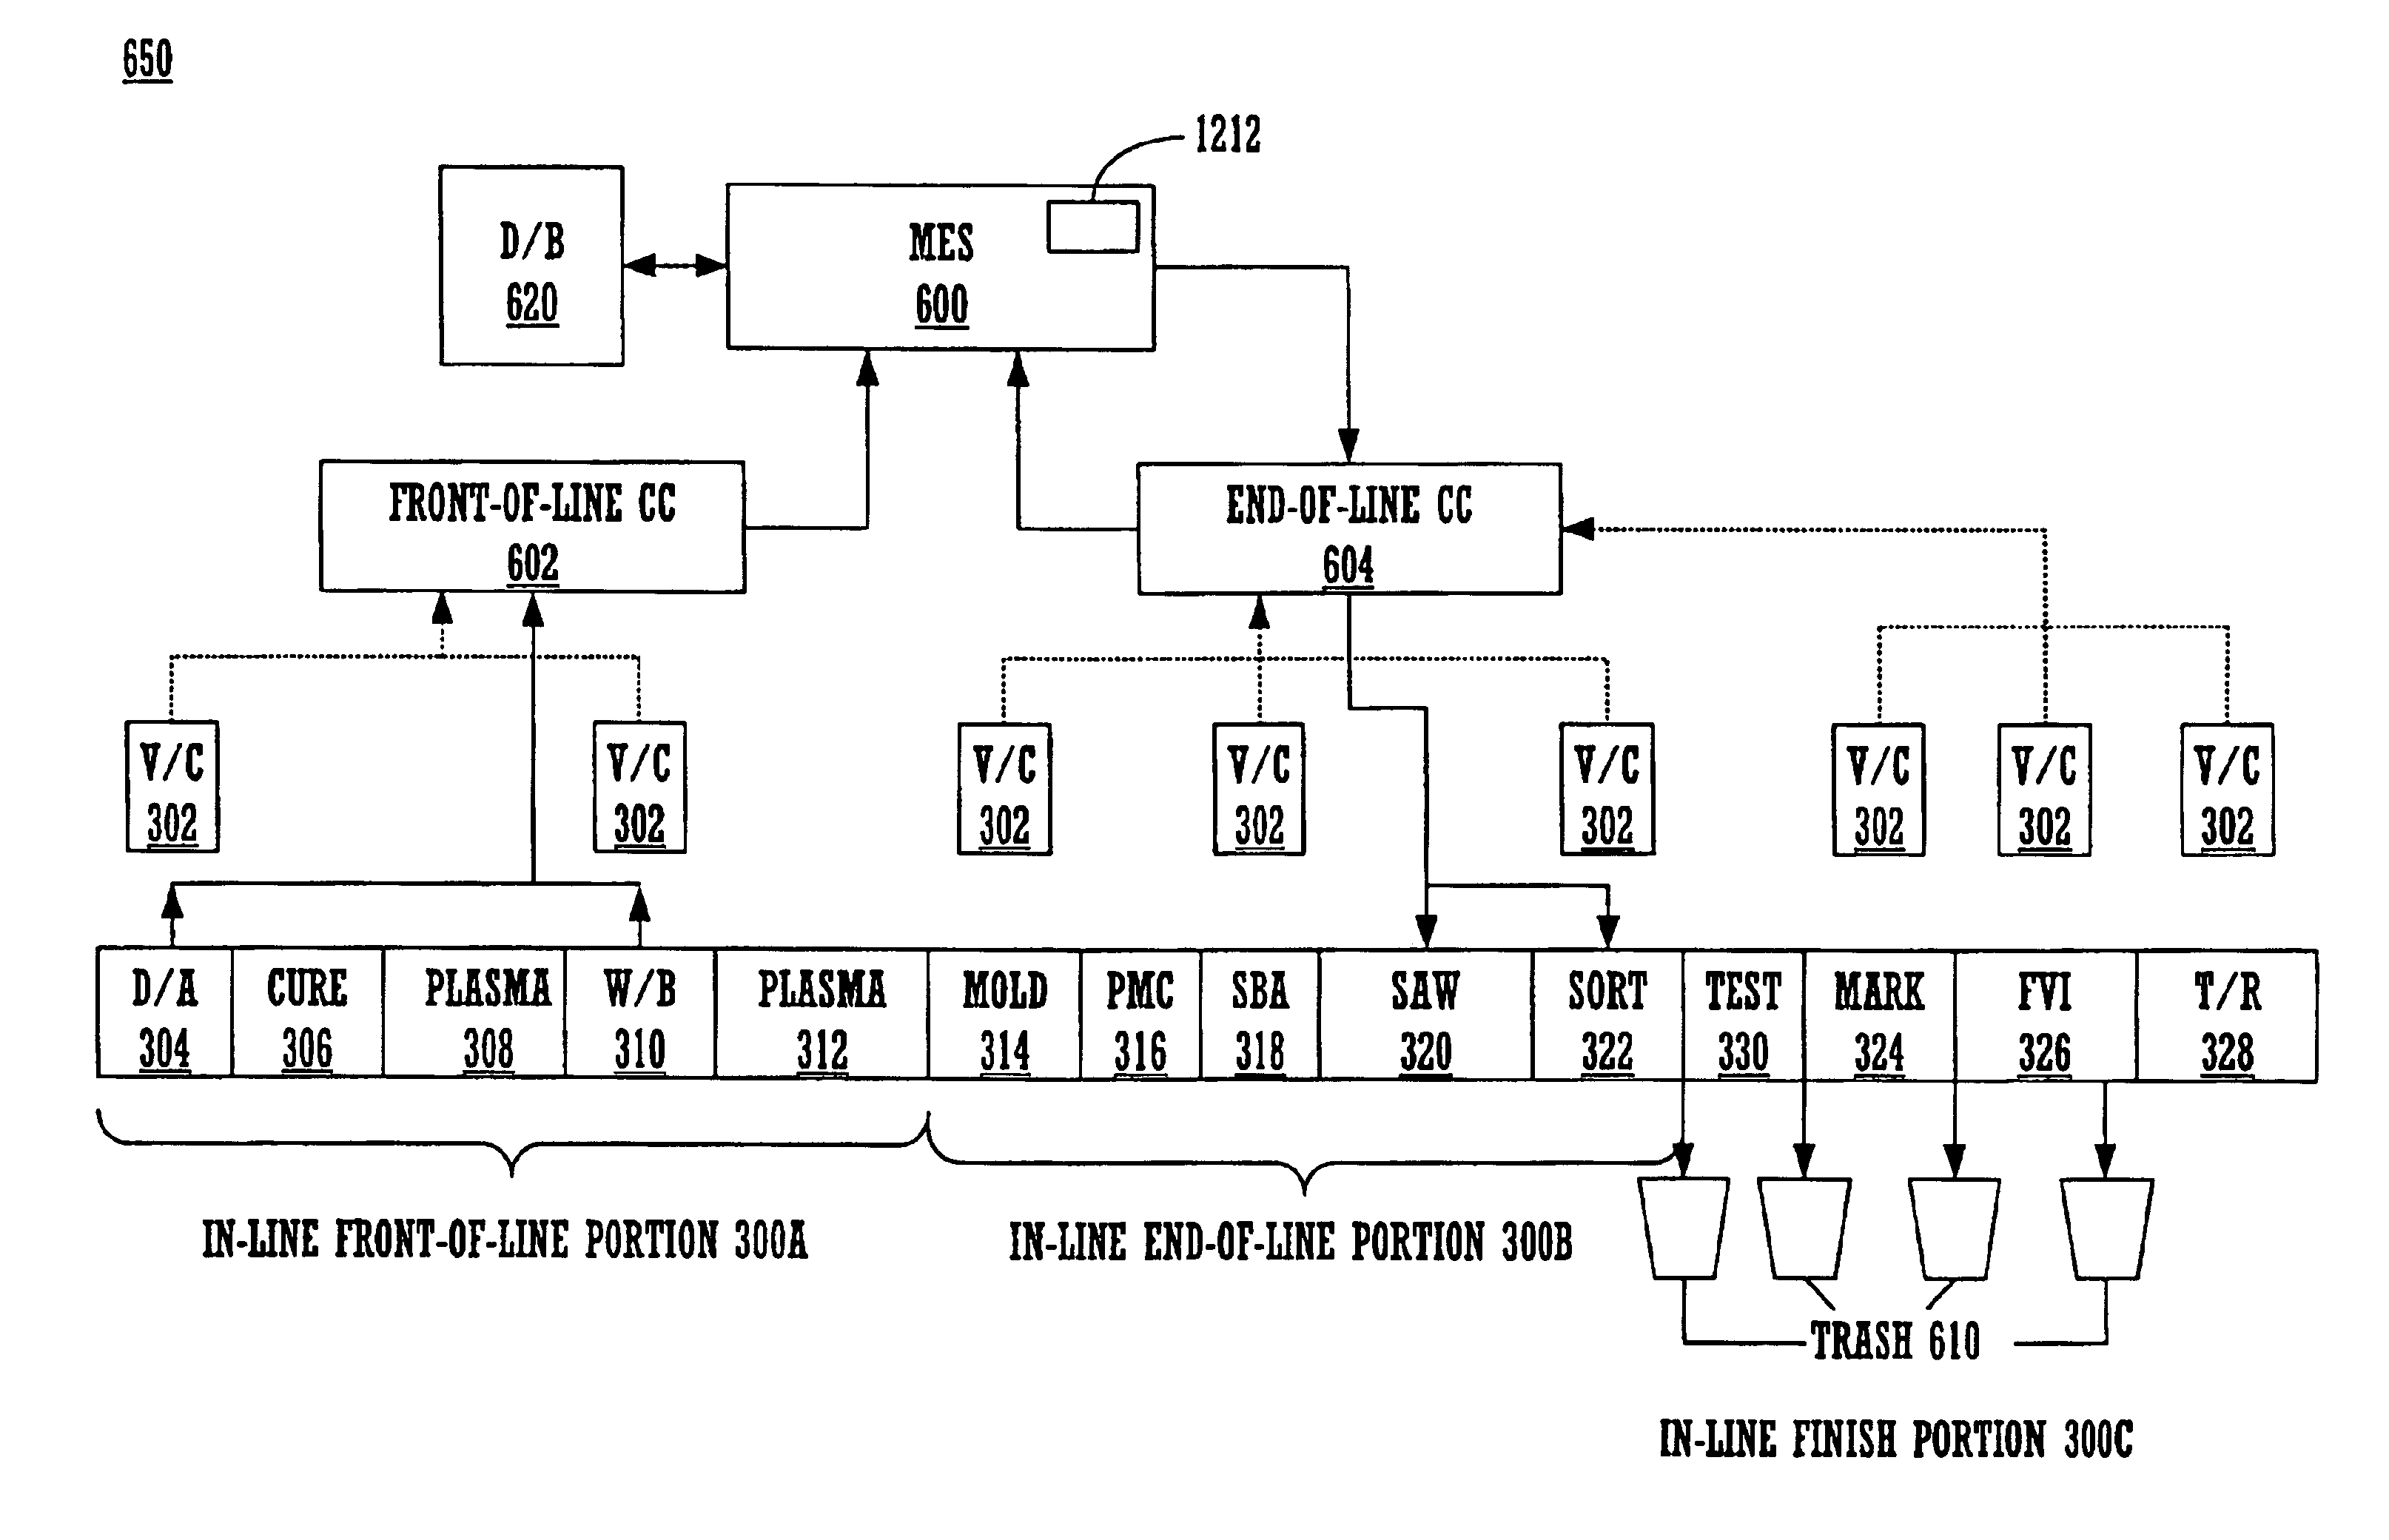 Integrated back-end integrated circuit manufacturing assembly